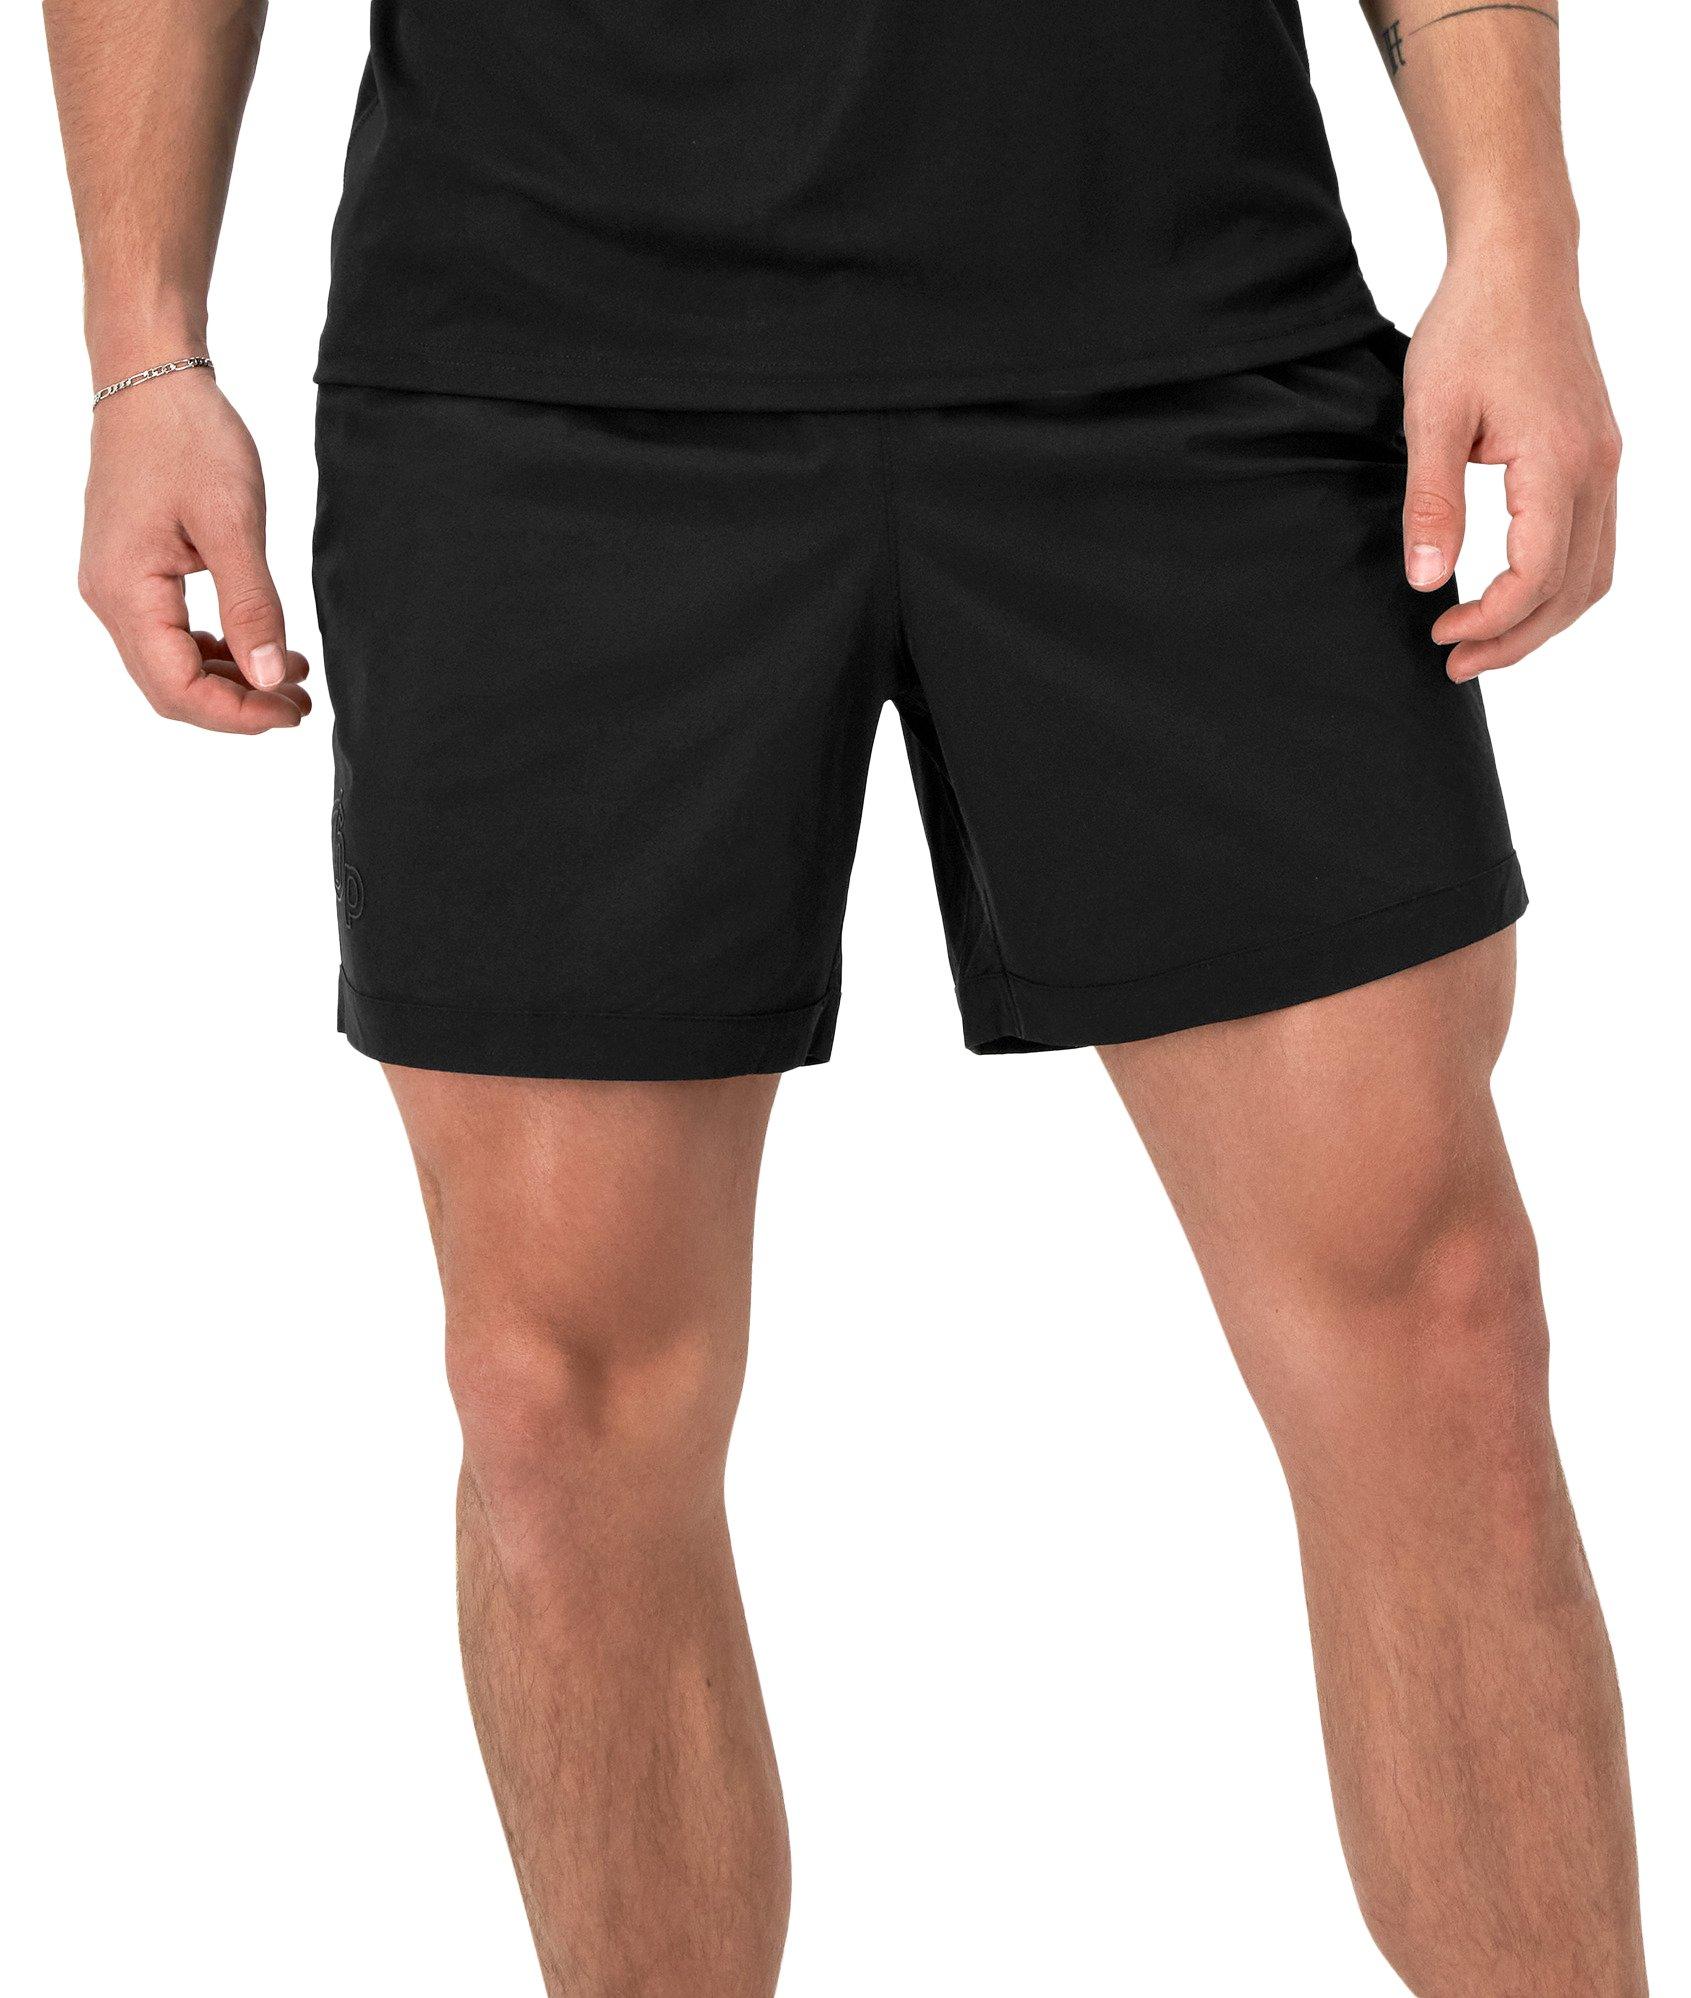 Mens 6 in. All-Purpose Shorts